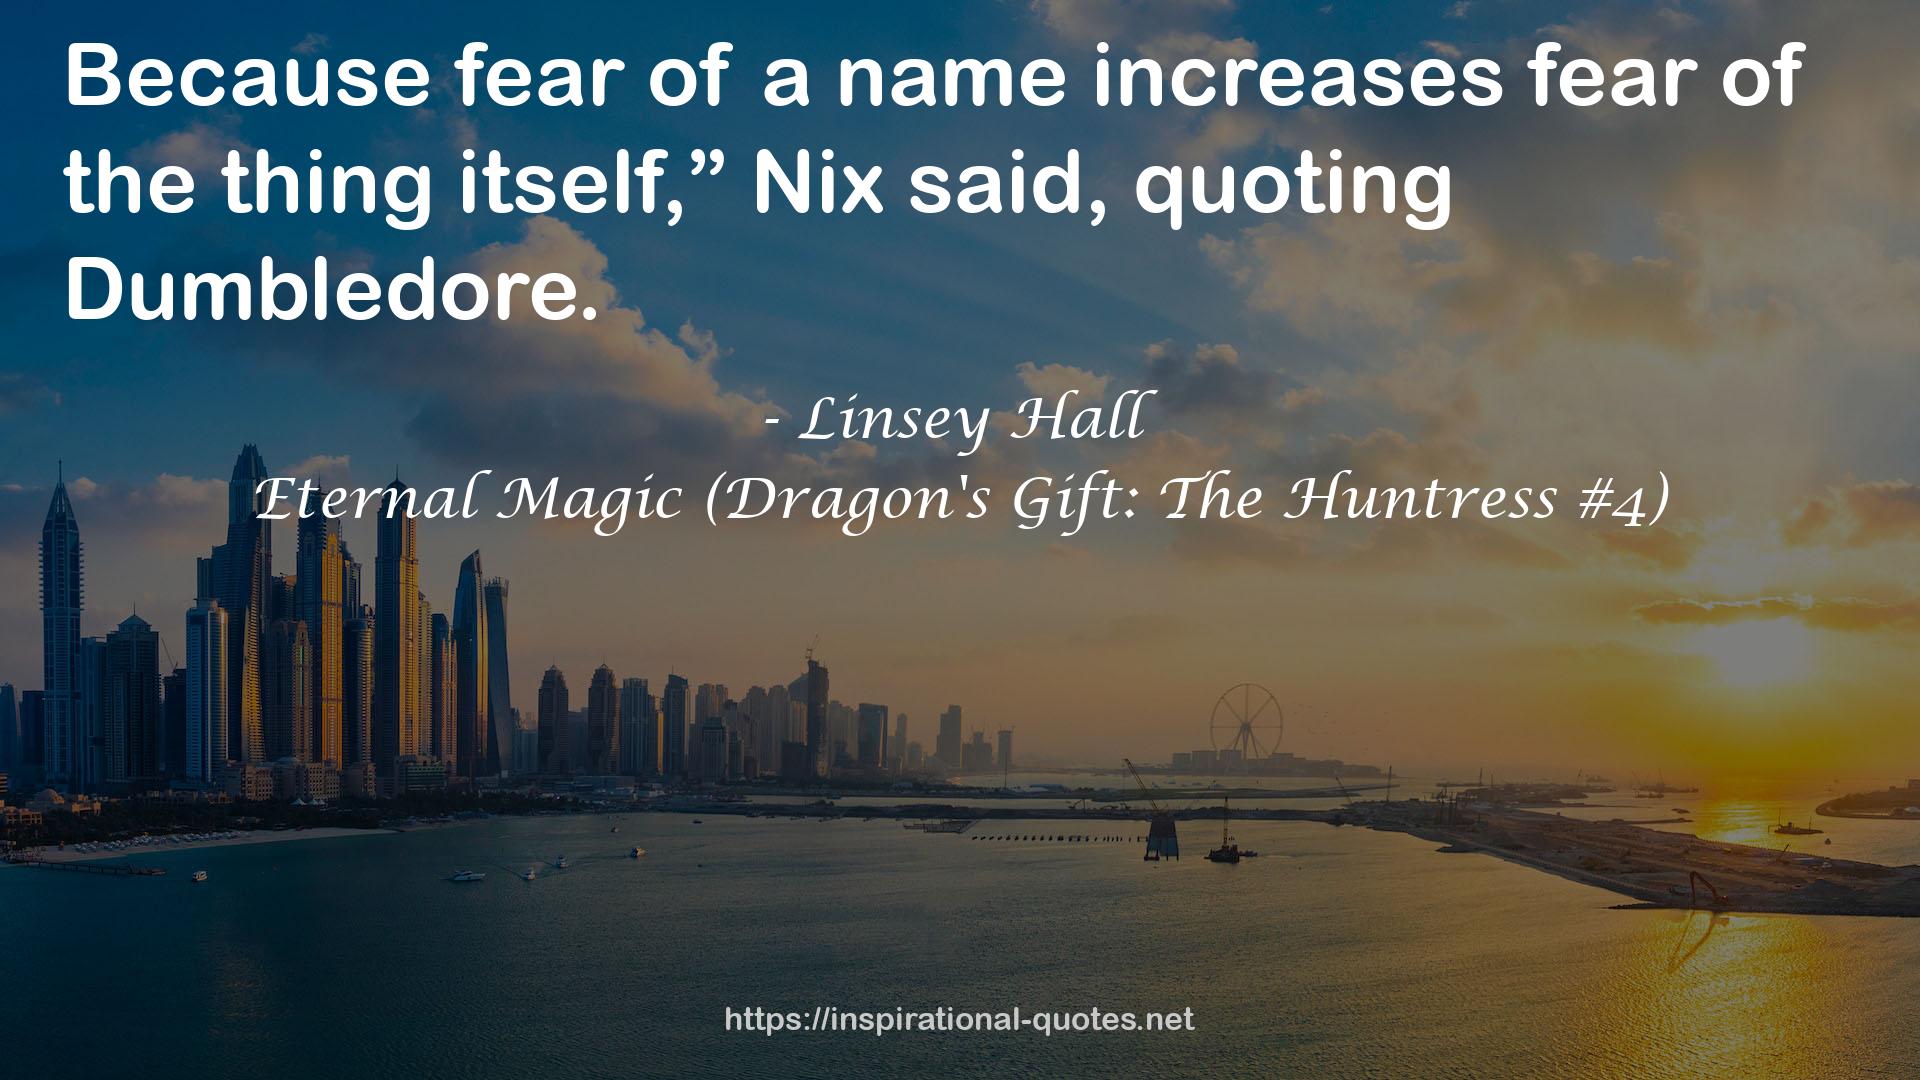 Eternal Magic (Dragon's Gift: The Huntress #4) QUOTES